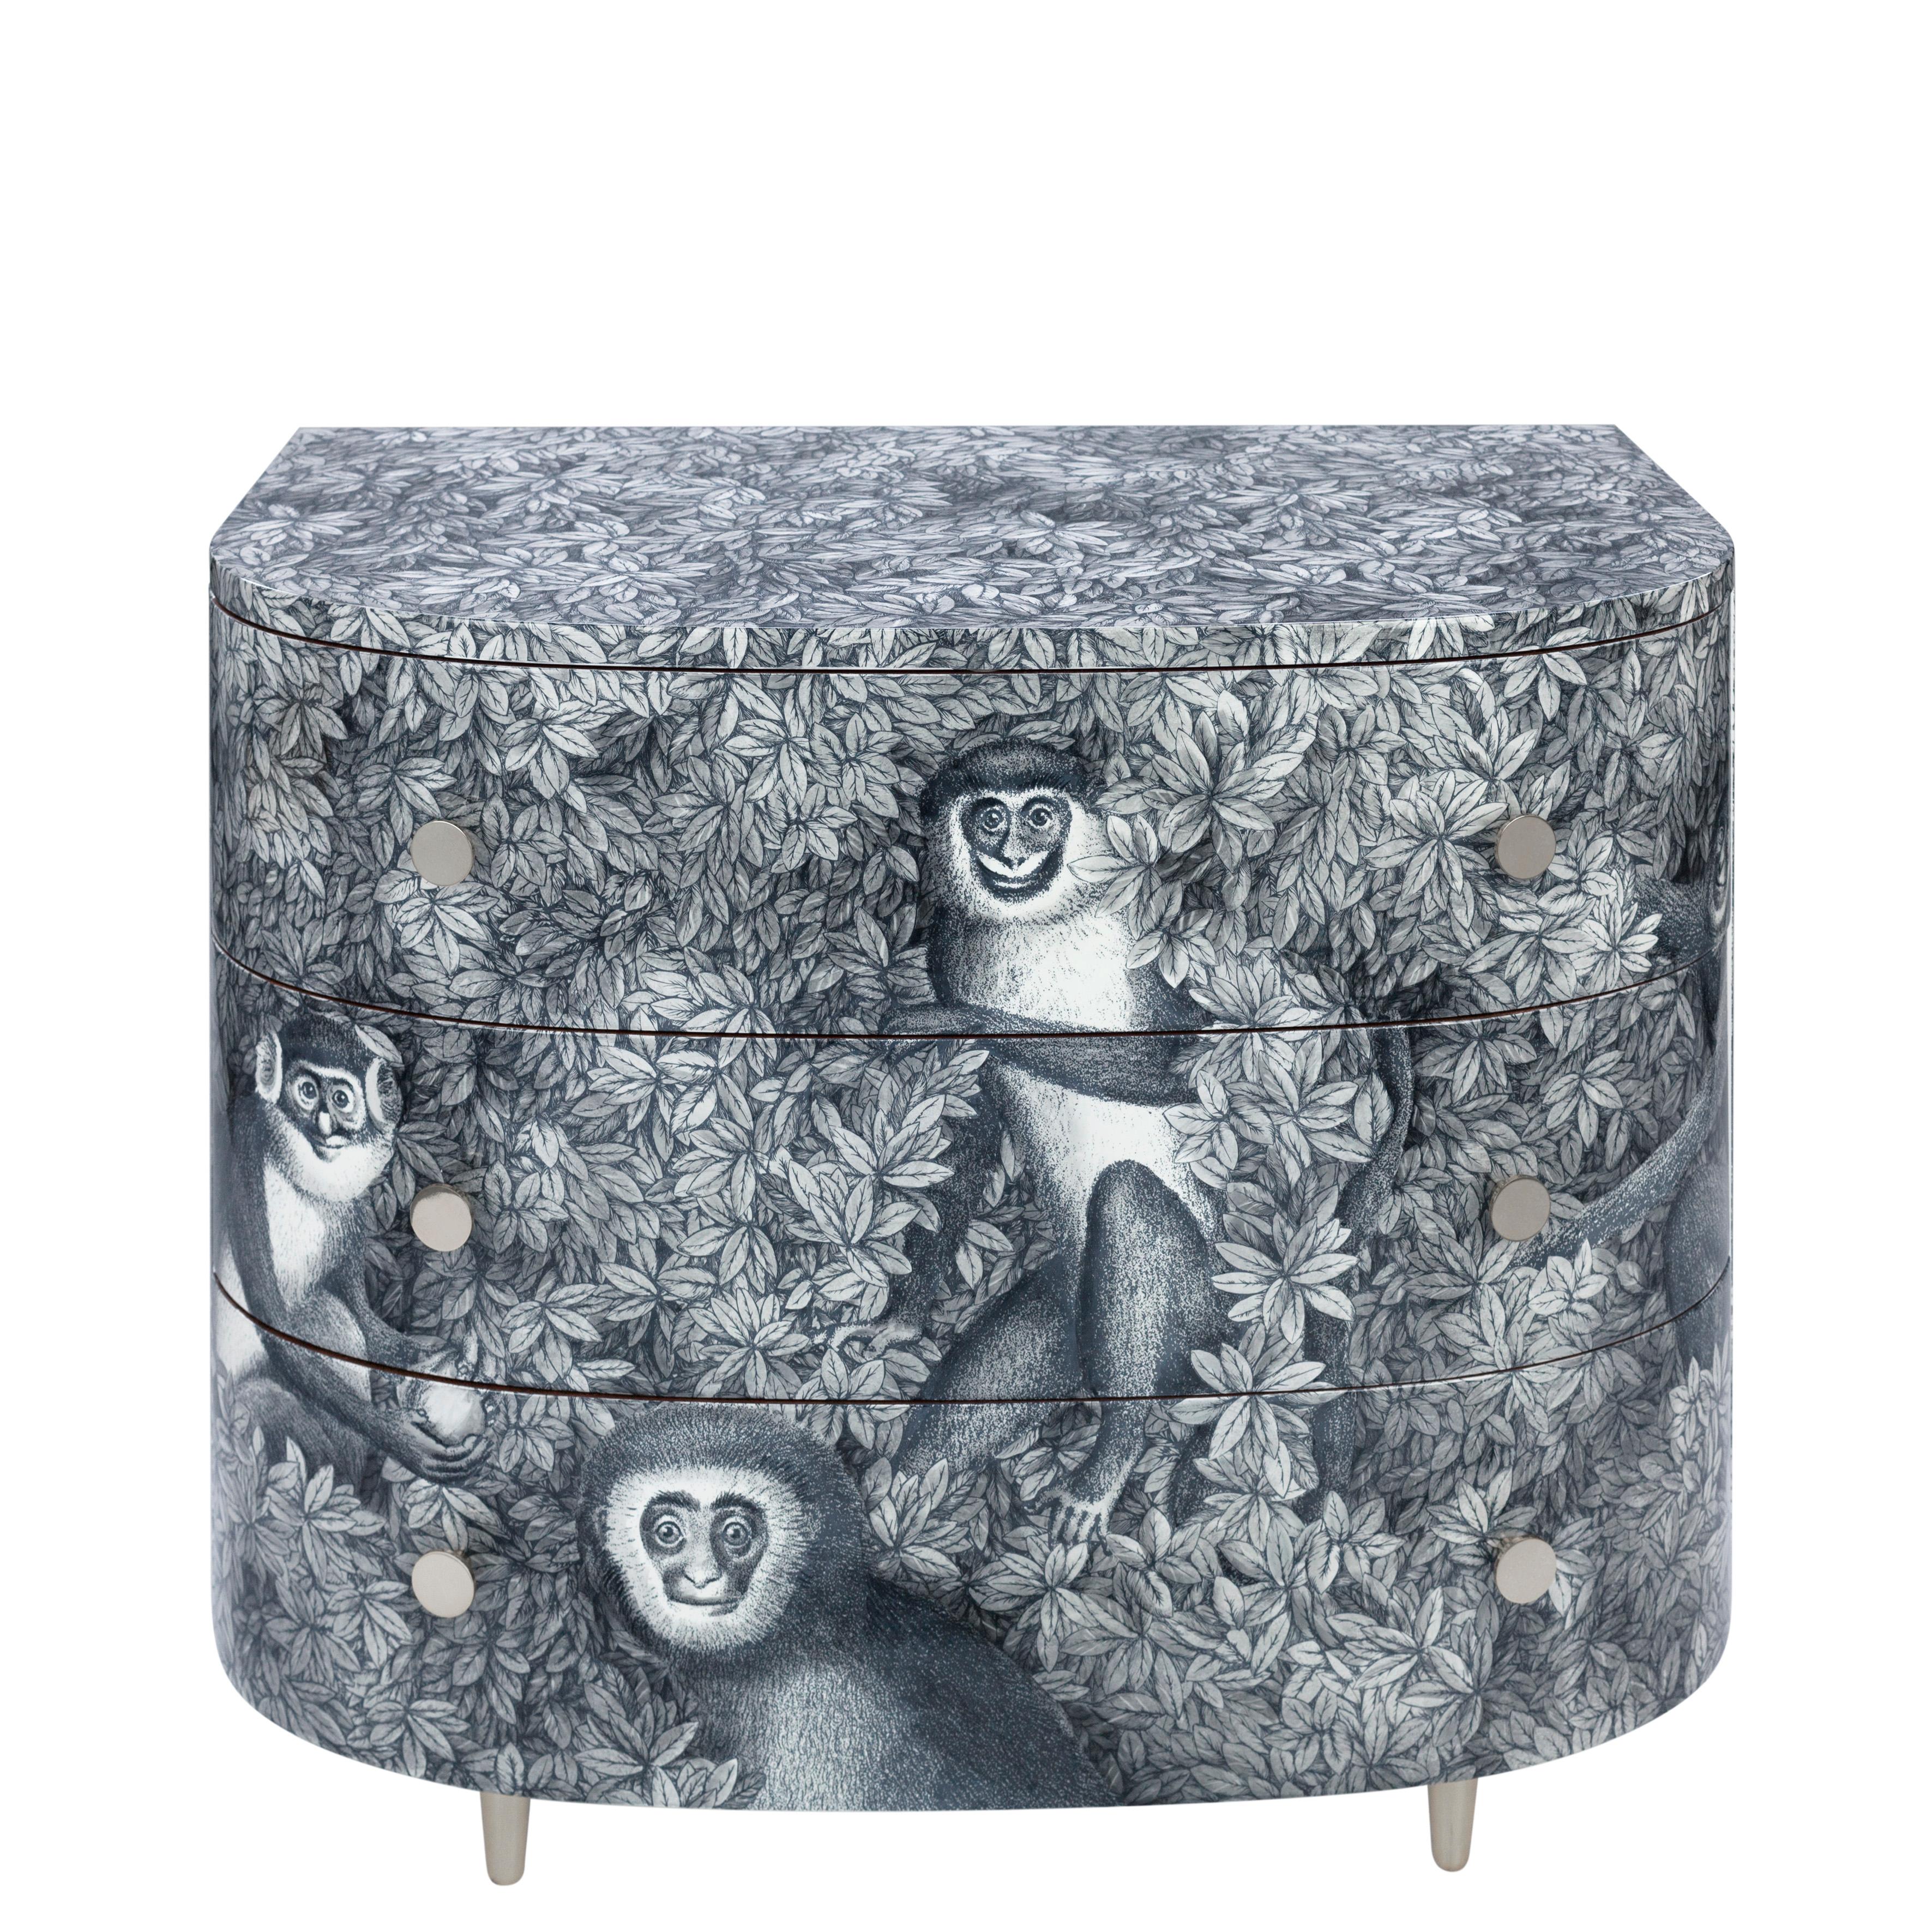 Like all Fornasetti pieces of furniture, it is handcrafted using original artisan techniques.
This corner cabinet is silk-screened by hand, hand-panited and covered with a smooth lacquer.

The decoration depicts the iconic Fornasetti monkeys on a